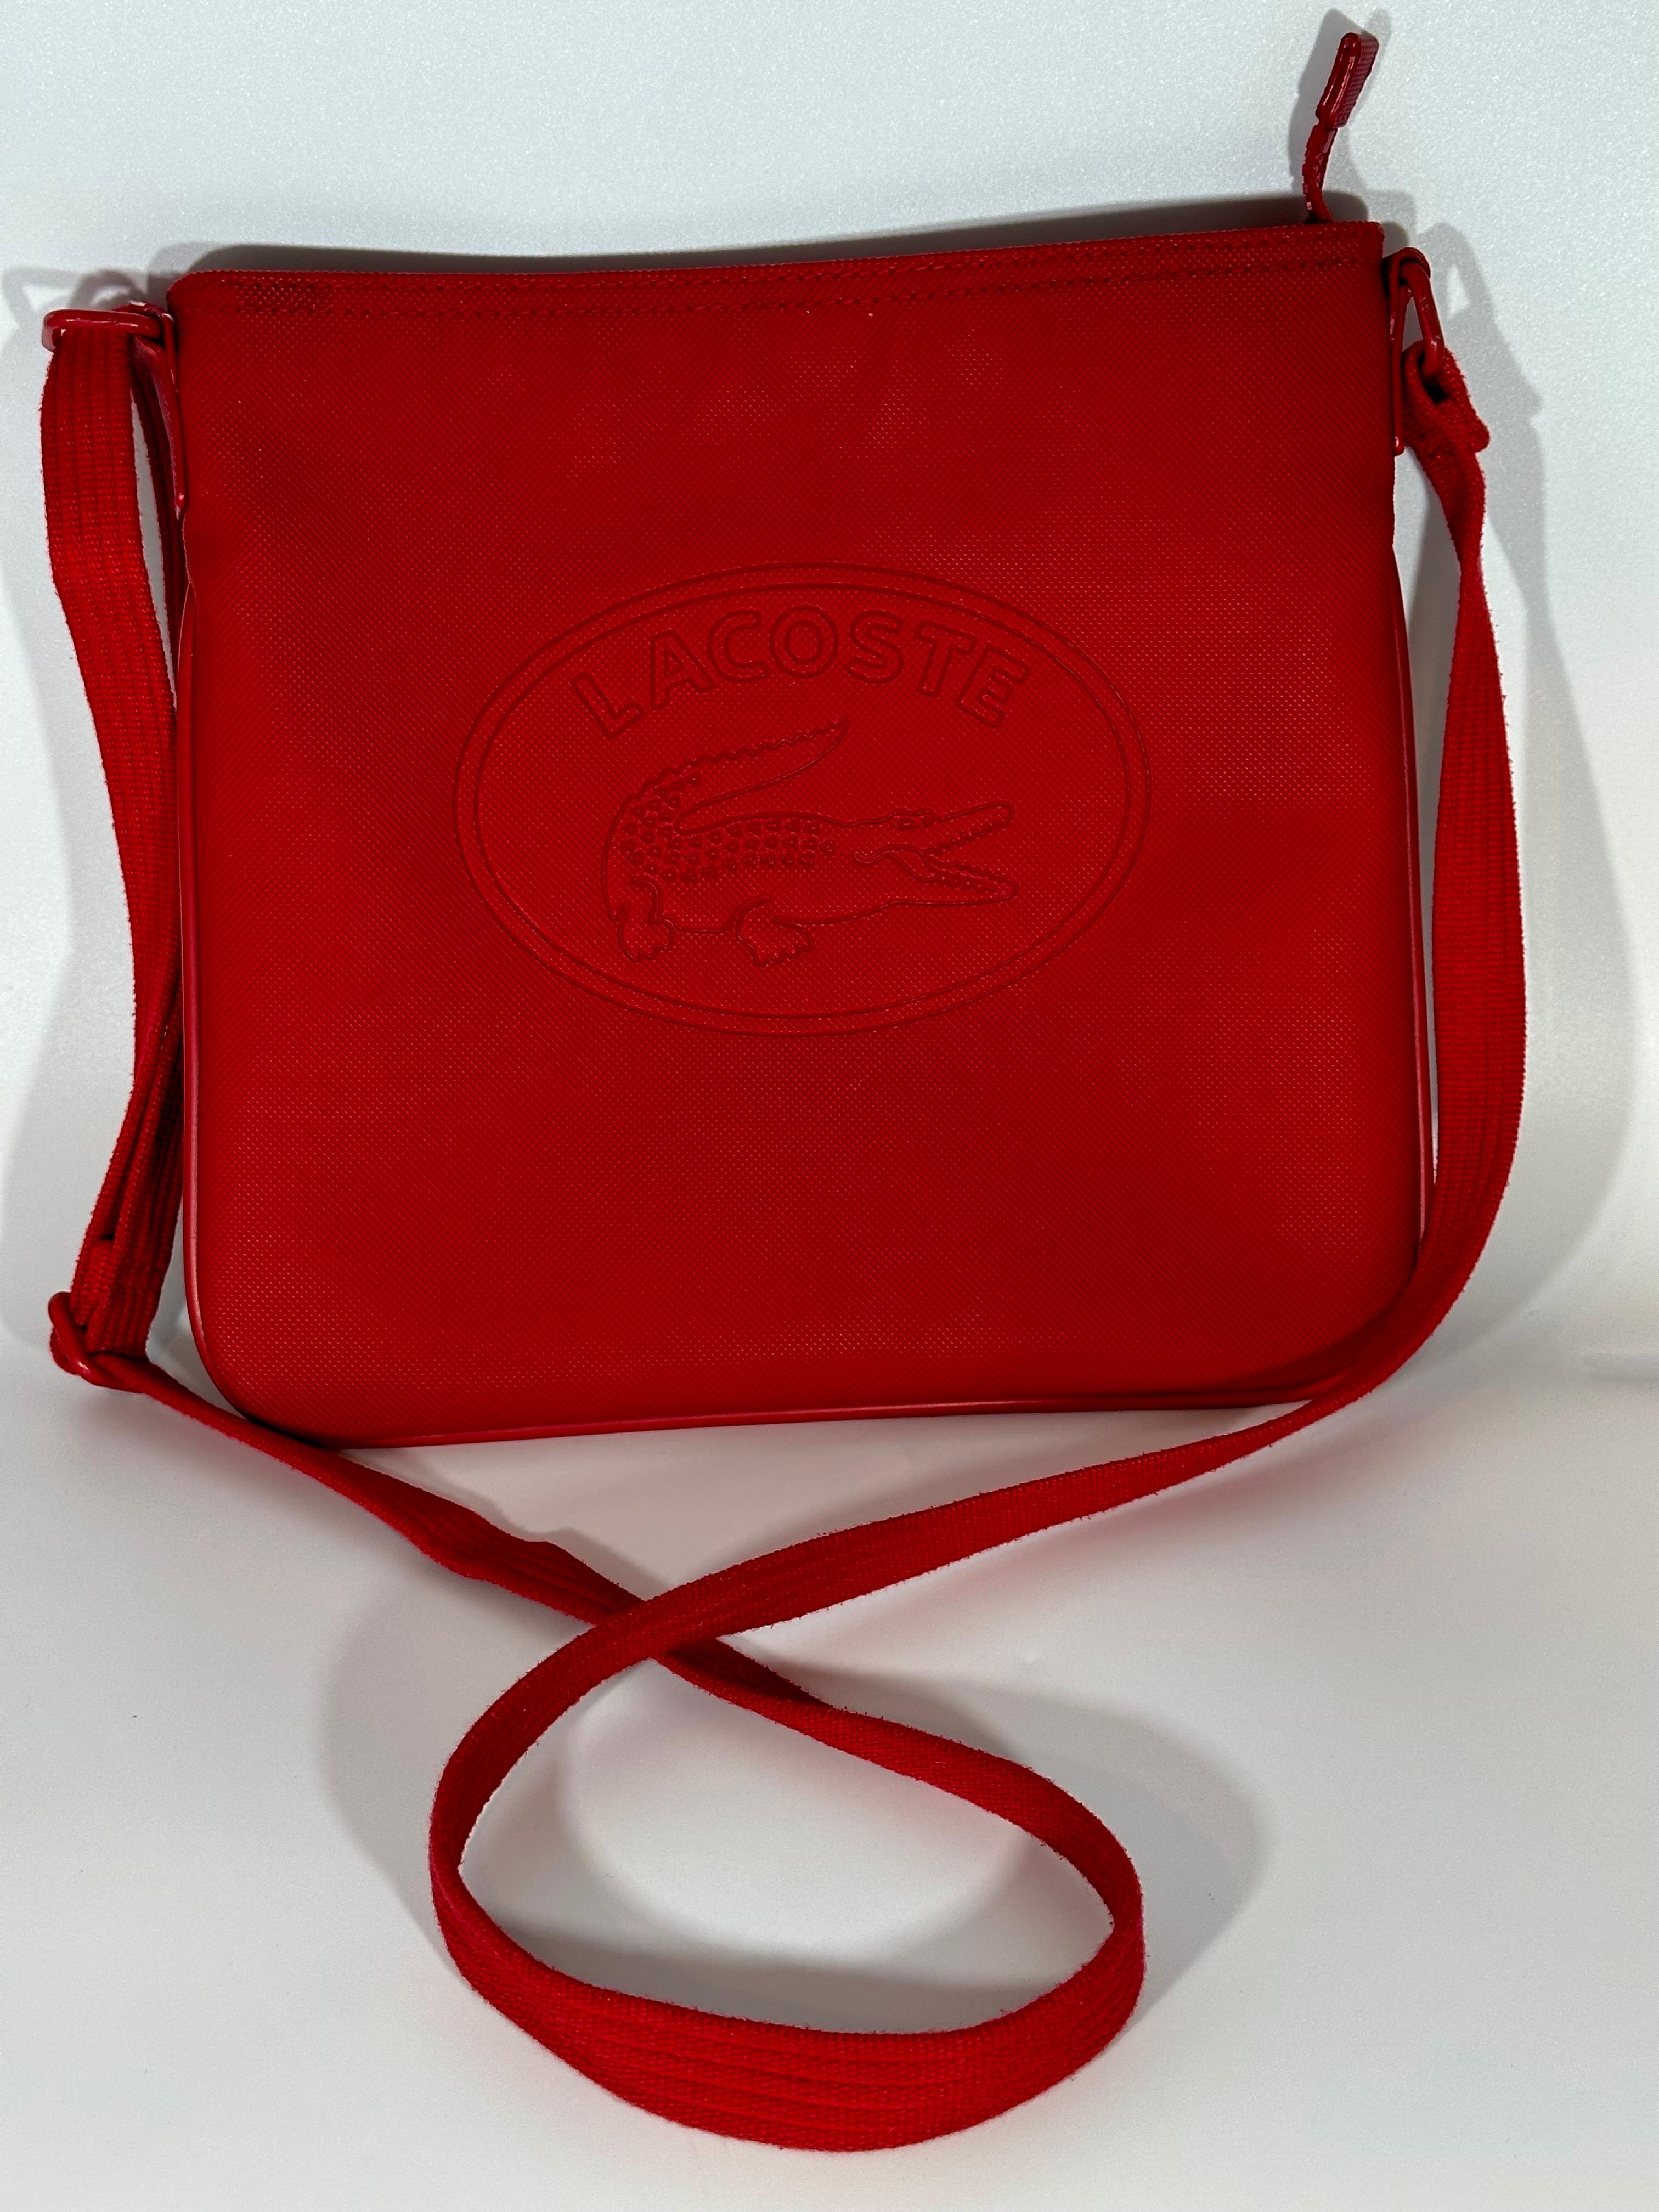 Women's LACOSTE Over the shoulder crossbody bag. Lacoste , Ultra Light, Red Color